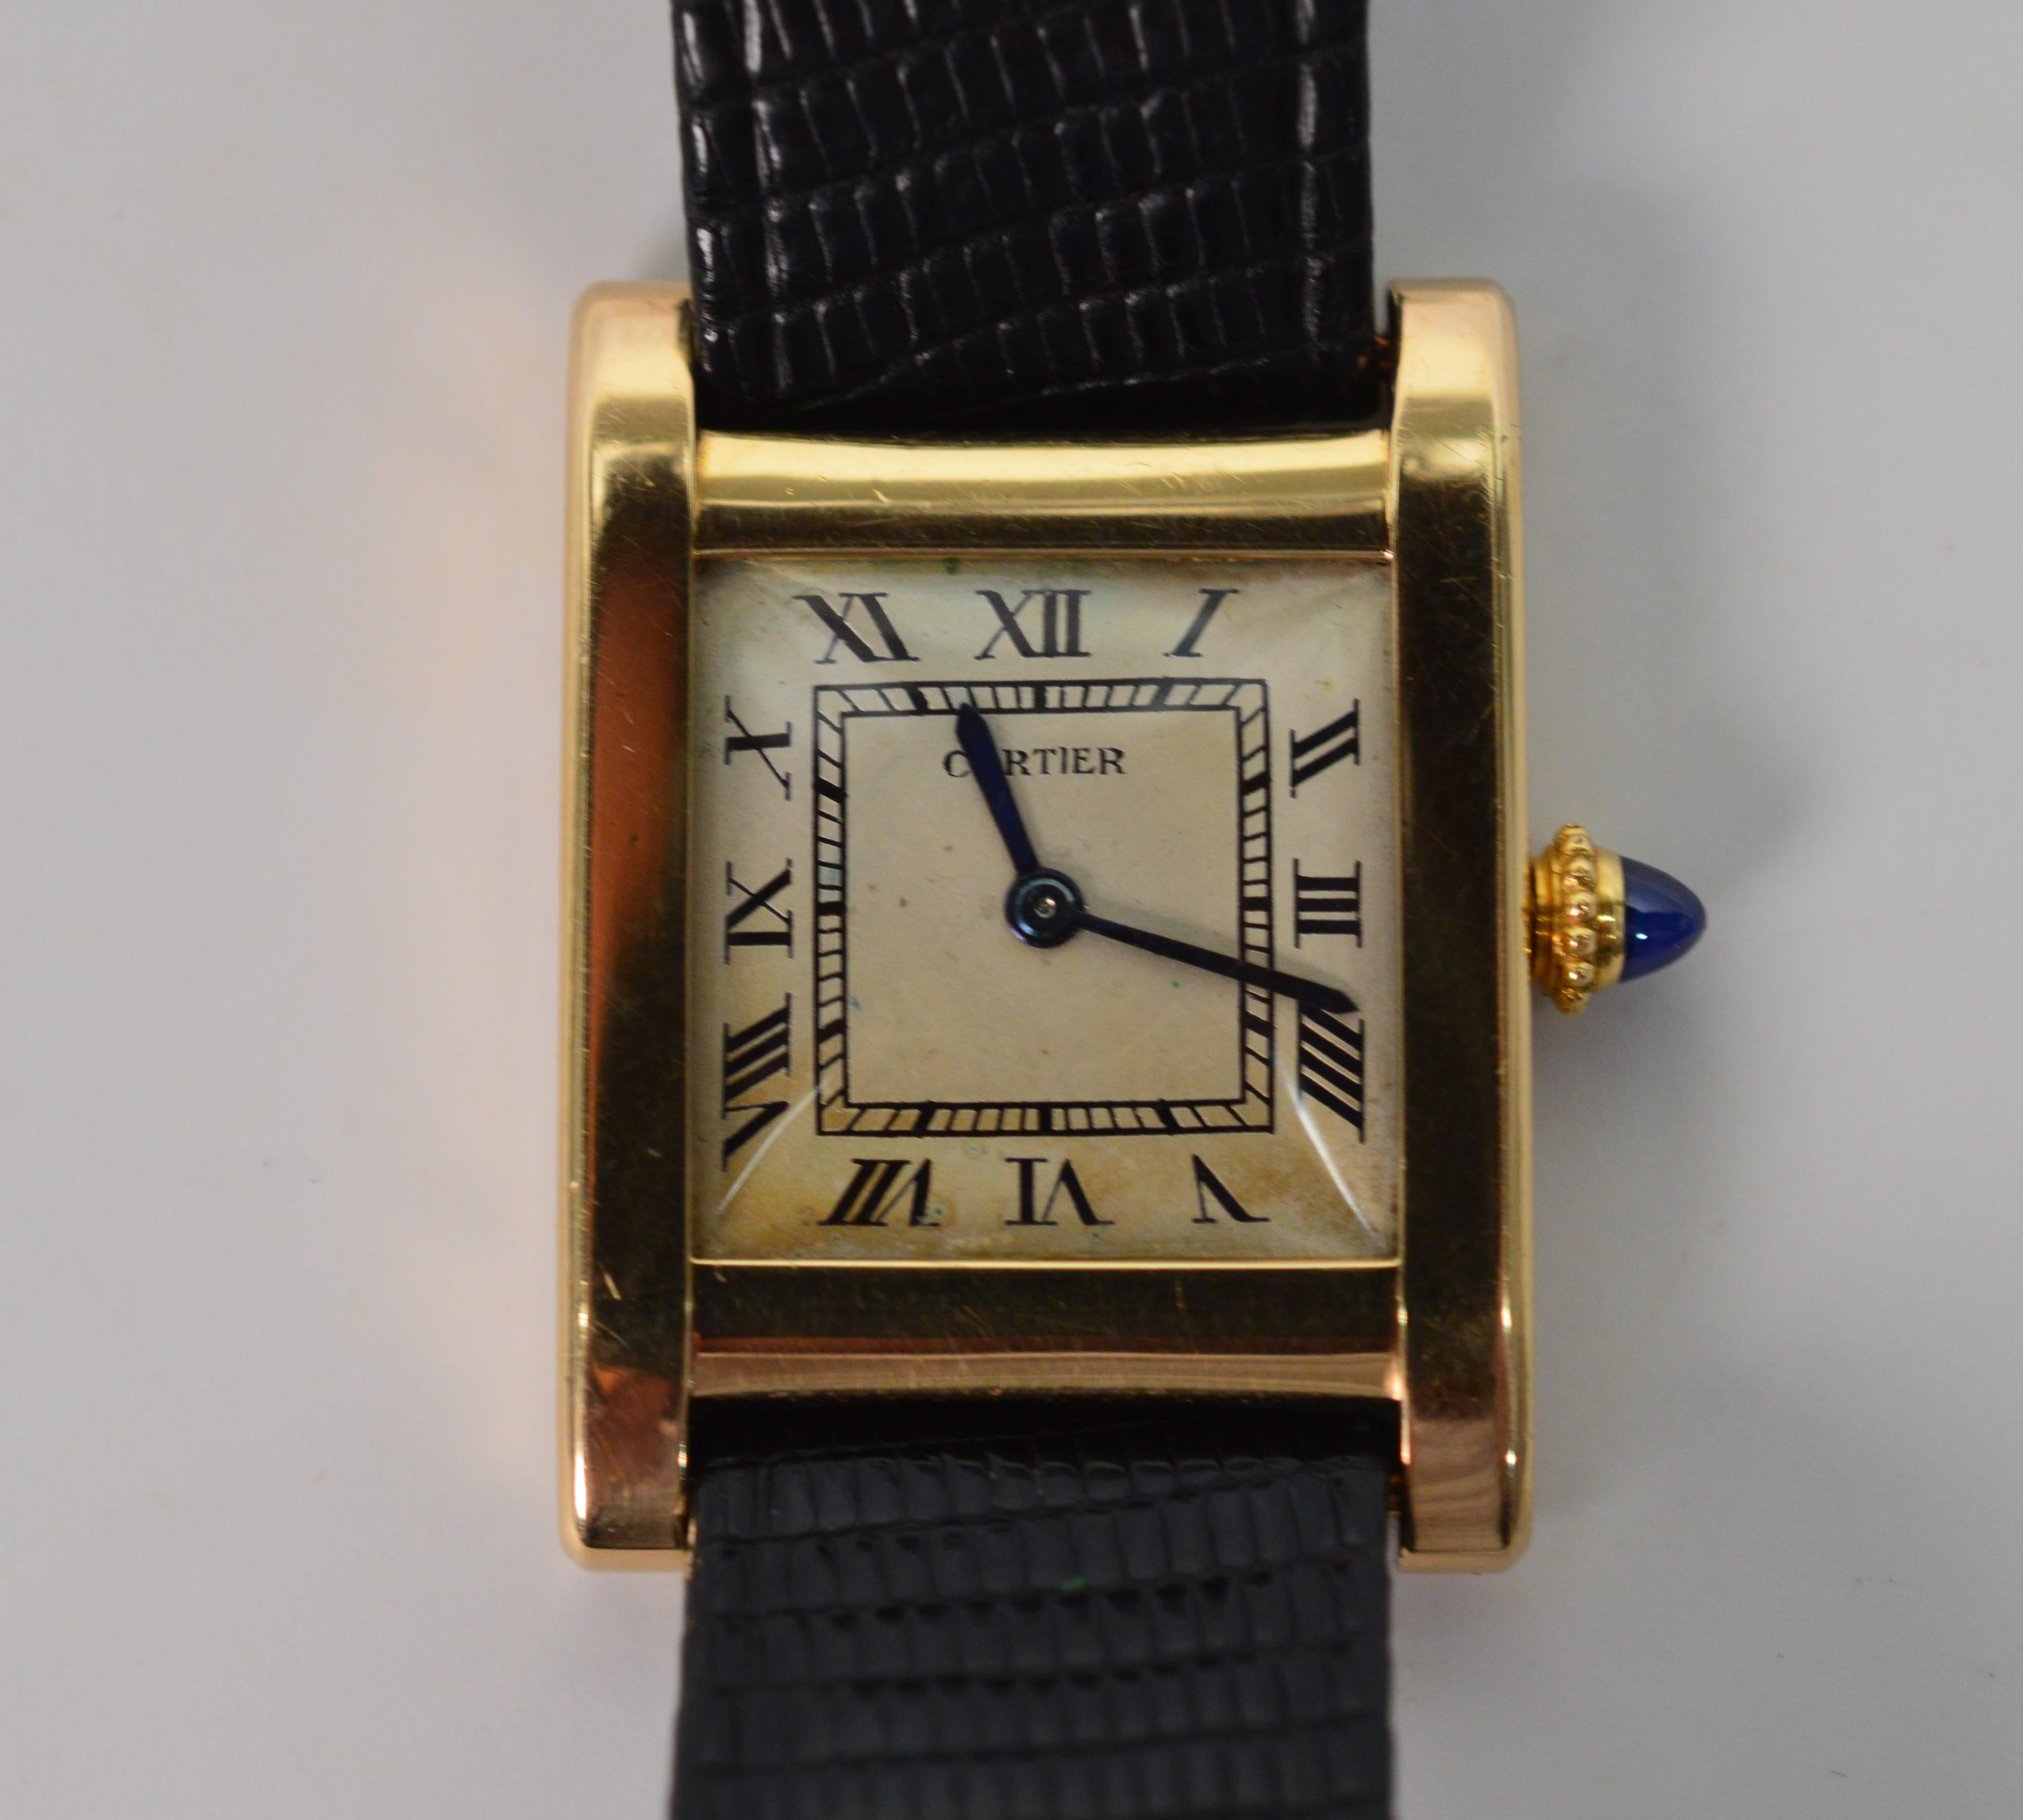 Rare and important pre-1920 Cartier Watch. Gold tank case marked 9K and .375 Gold with Cartier number 7284 and case makers mark JC and production number 486168. European Watch and Clock Co. with high grade 18 Jeweled movement number 486168.